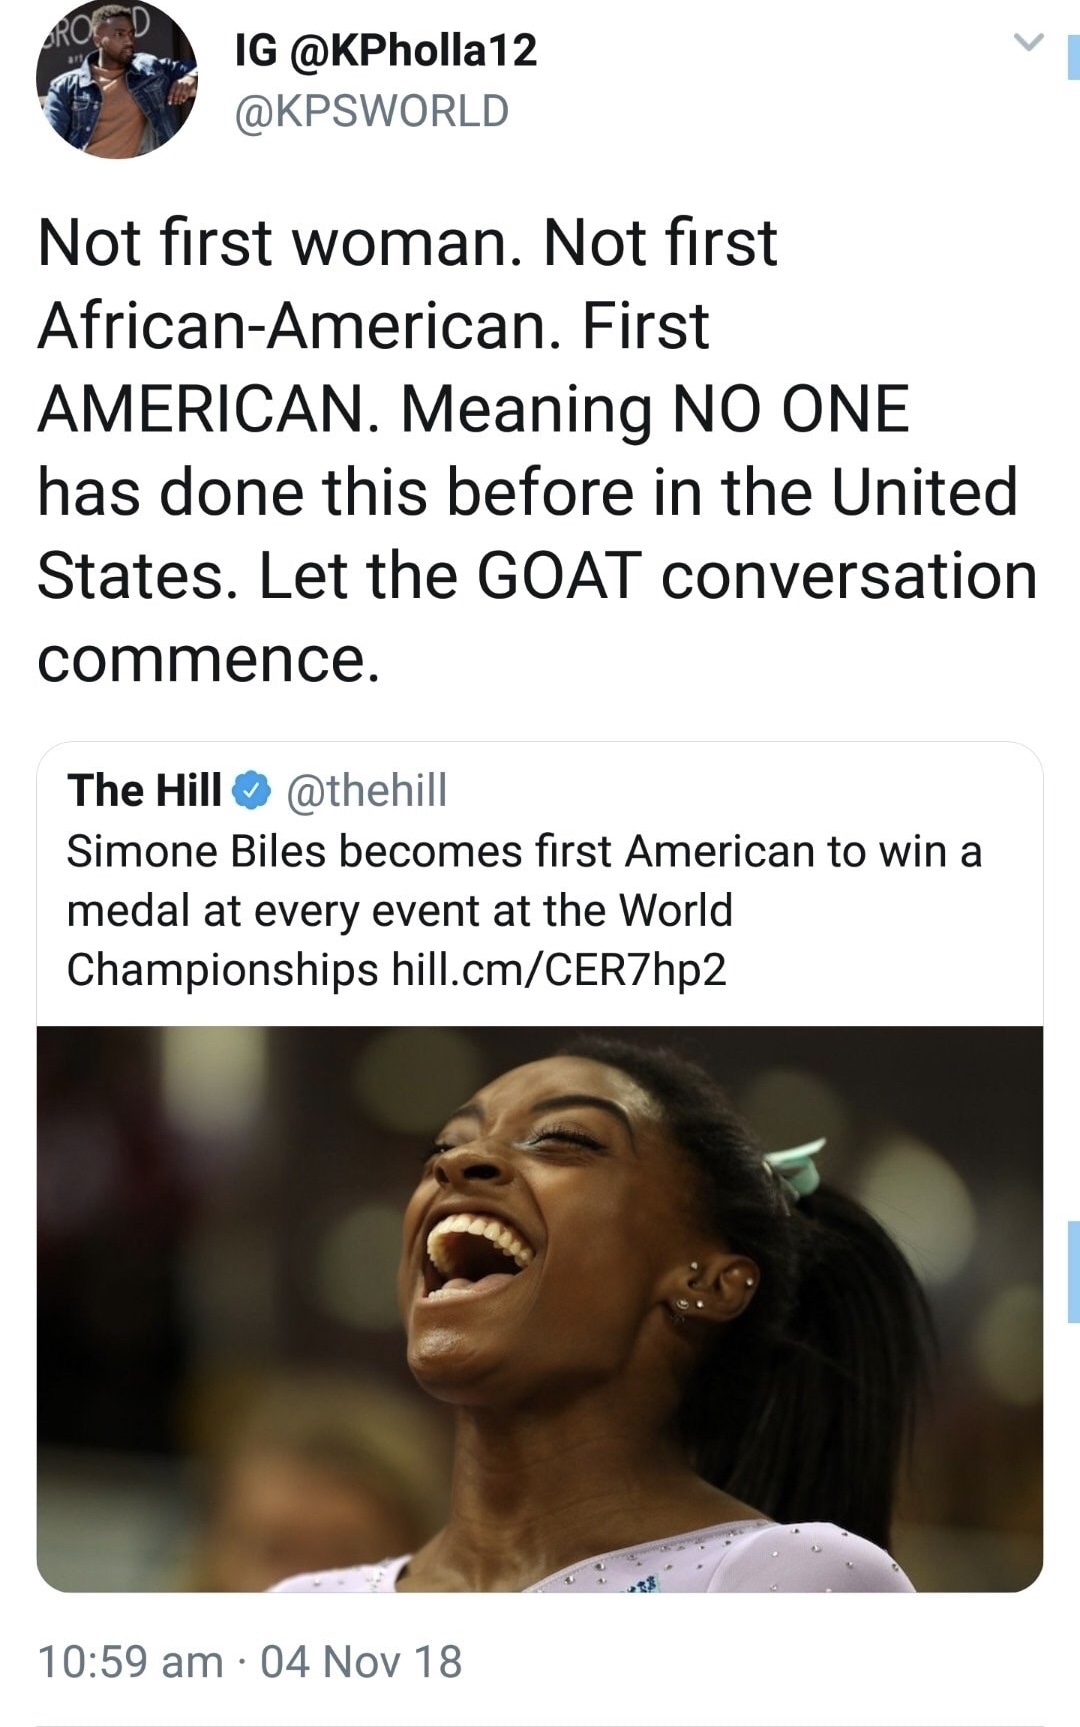 simone biles goat - Ig 12 Not first woman. Not first AfricanAmerican. First American. Meaning No One has done this before in the United States. Let the Goat conversation commence. The Hill Simone Biles becomes first American to win a medal at every event 